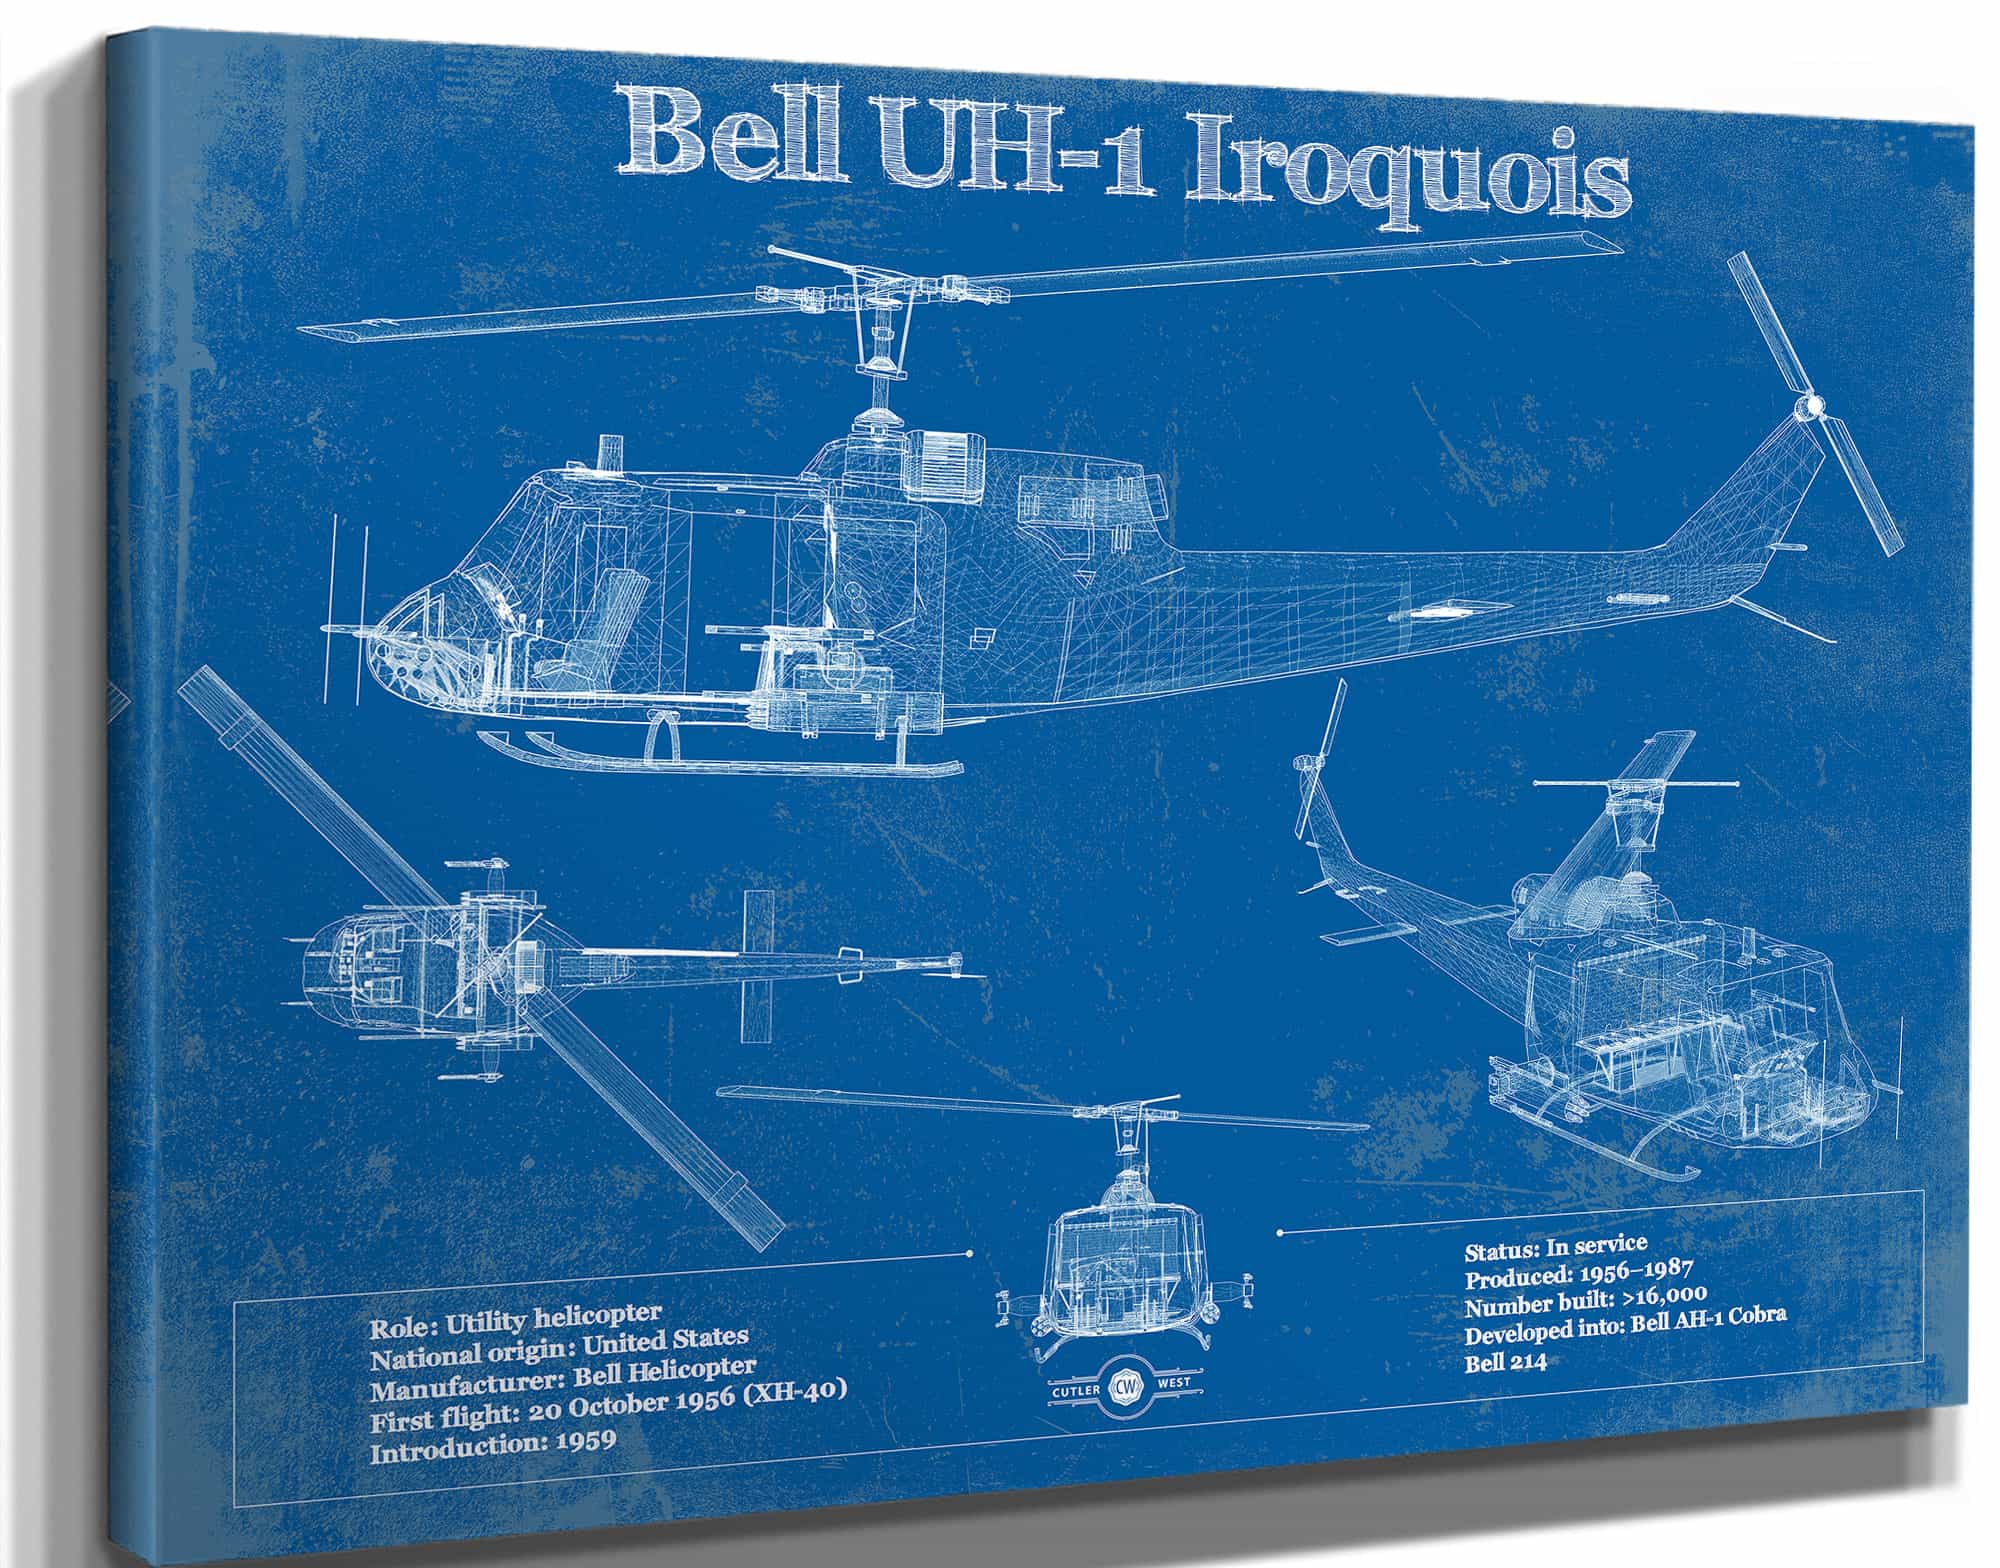 Bell UH-1 Iroquois (Huey) Vintage Blueprint Helicopter Print